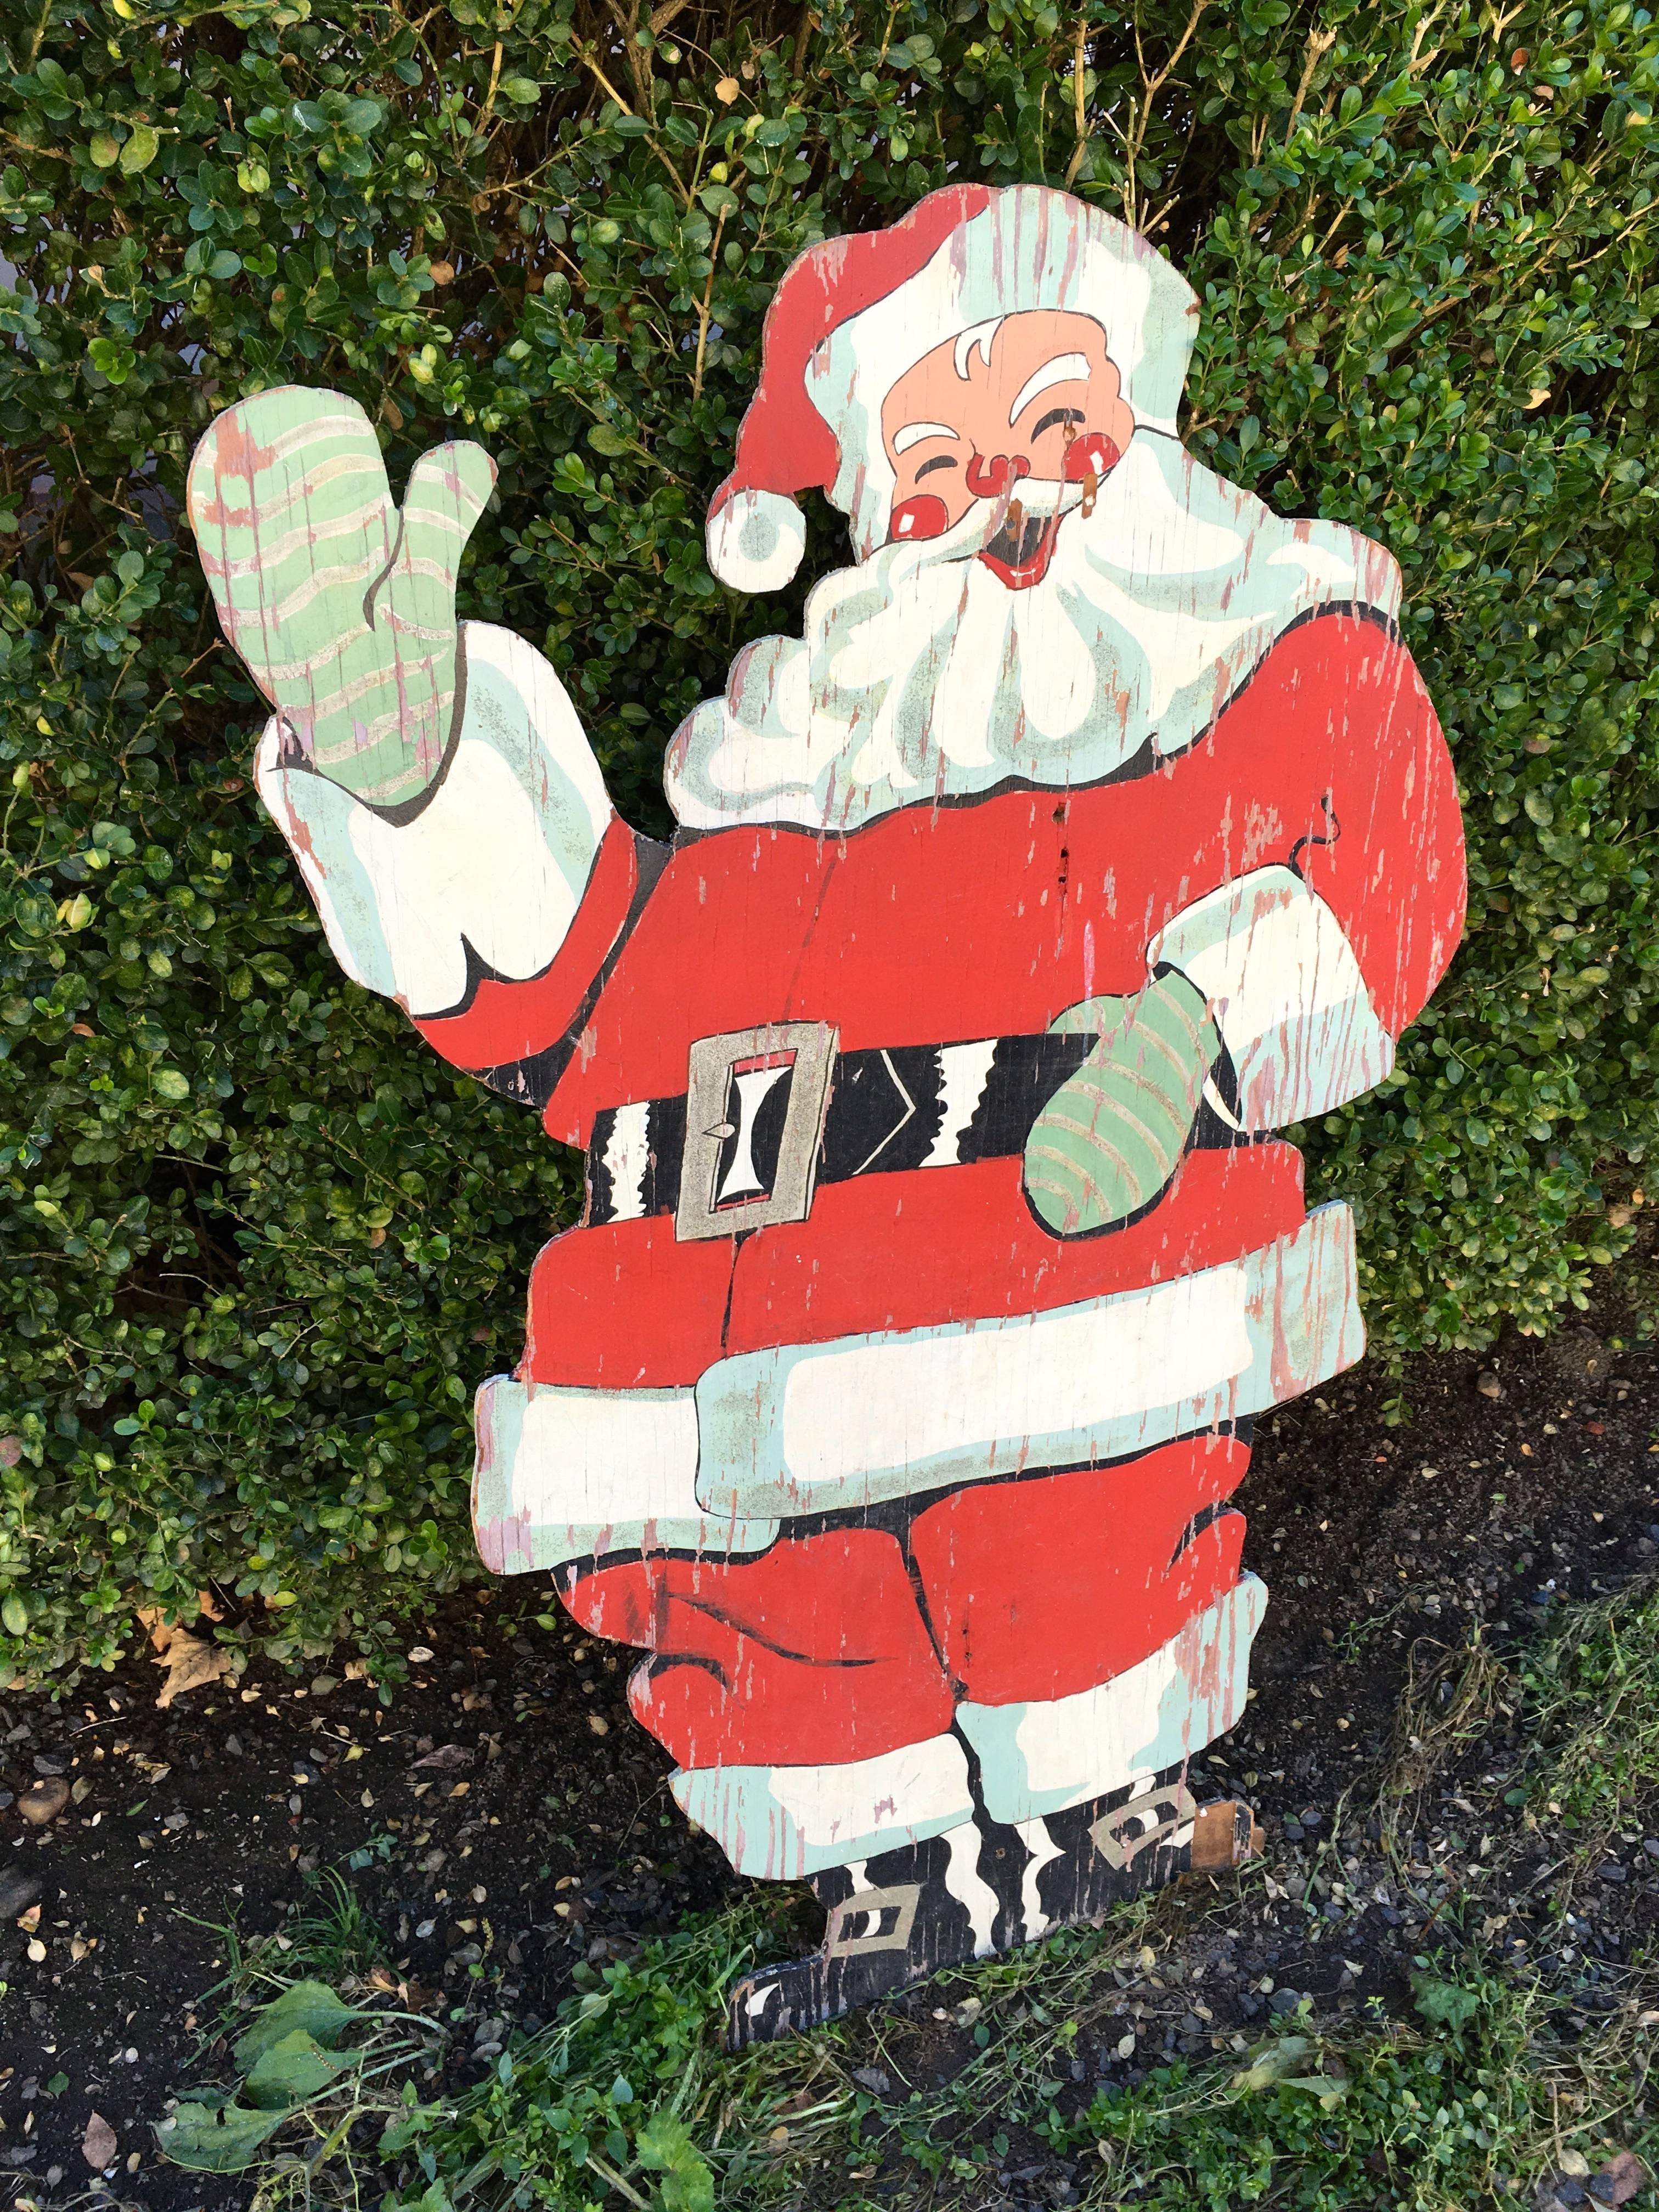 What a great addition to your holiday decorations! This jolly figure of St. Nick is hand-painted and would be perfect standing beside your Christmas tree or up against a decorative mantel surrounded by swags of green boughs. Currently, Santa needs